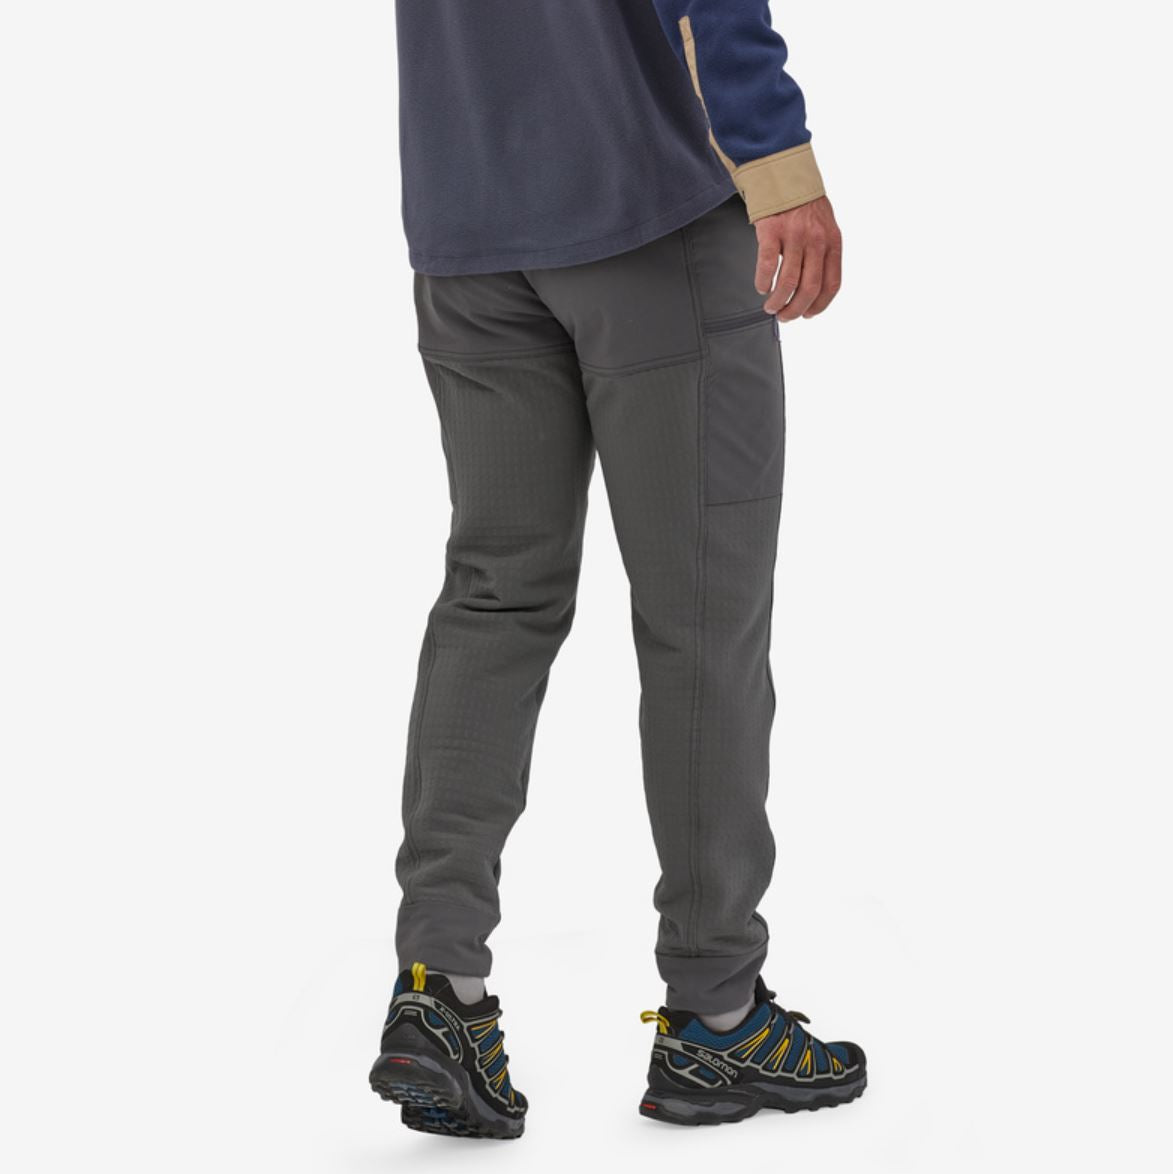 patagonia mens r2 techface pants in forge grey, back view on a model